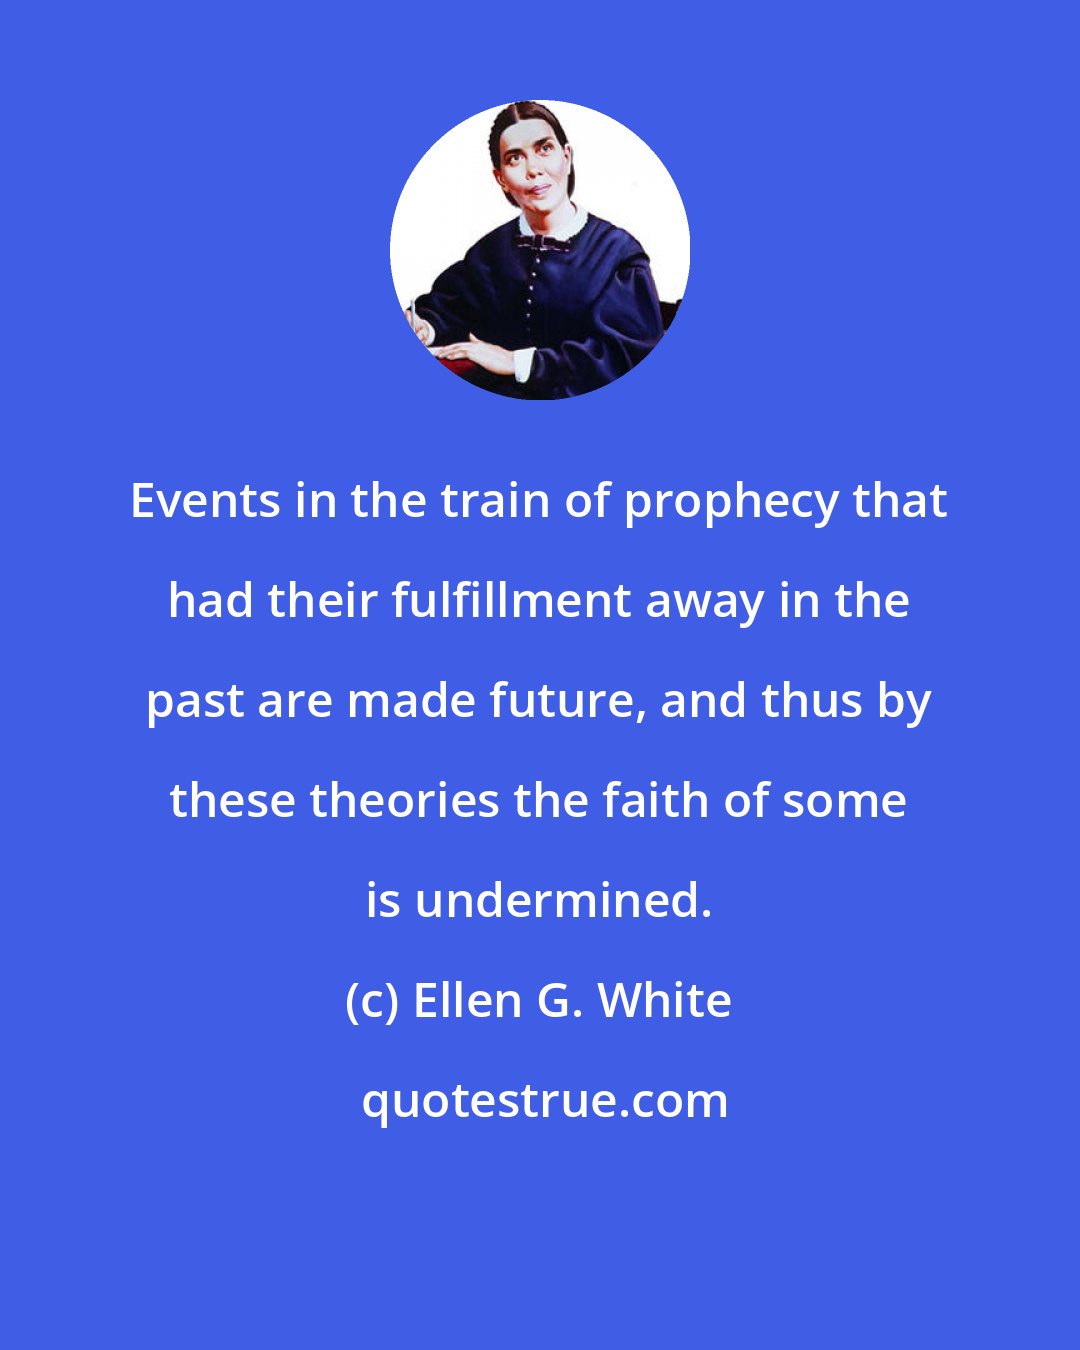 Ellen G. White: Events in the train of prophecy that had their fulfillment away in the past are made future, and thus by these theories the faith of some is undermined.